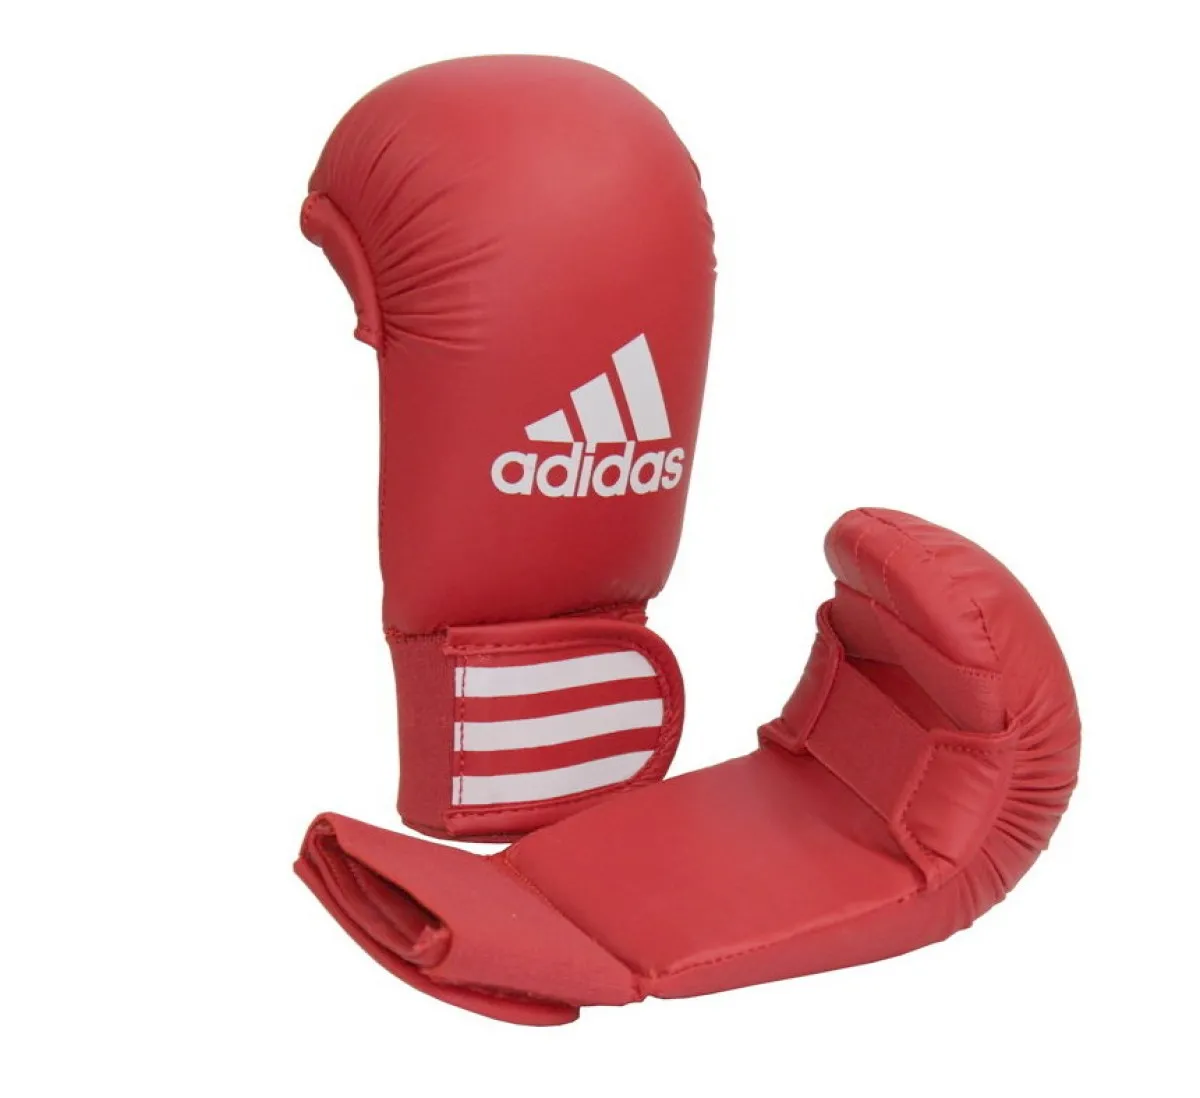 Protège-poings adidas Training rouge